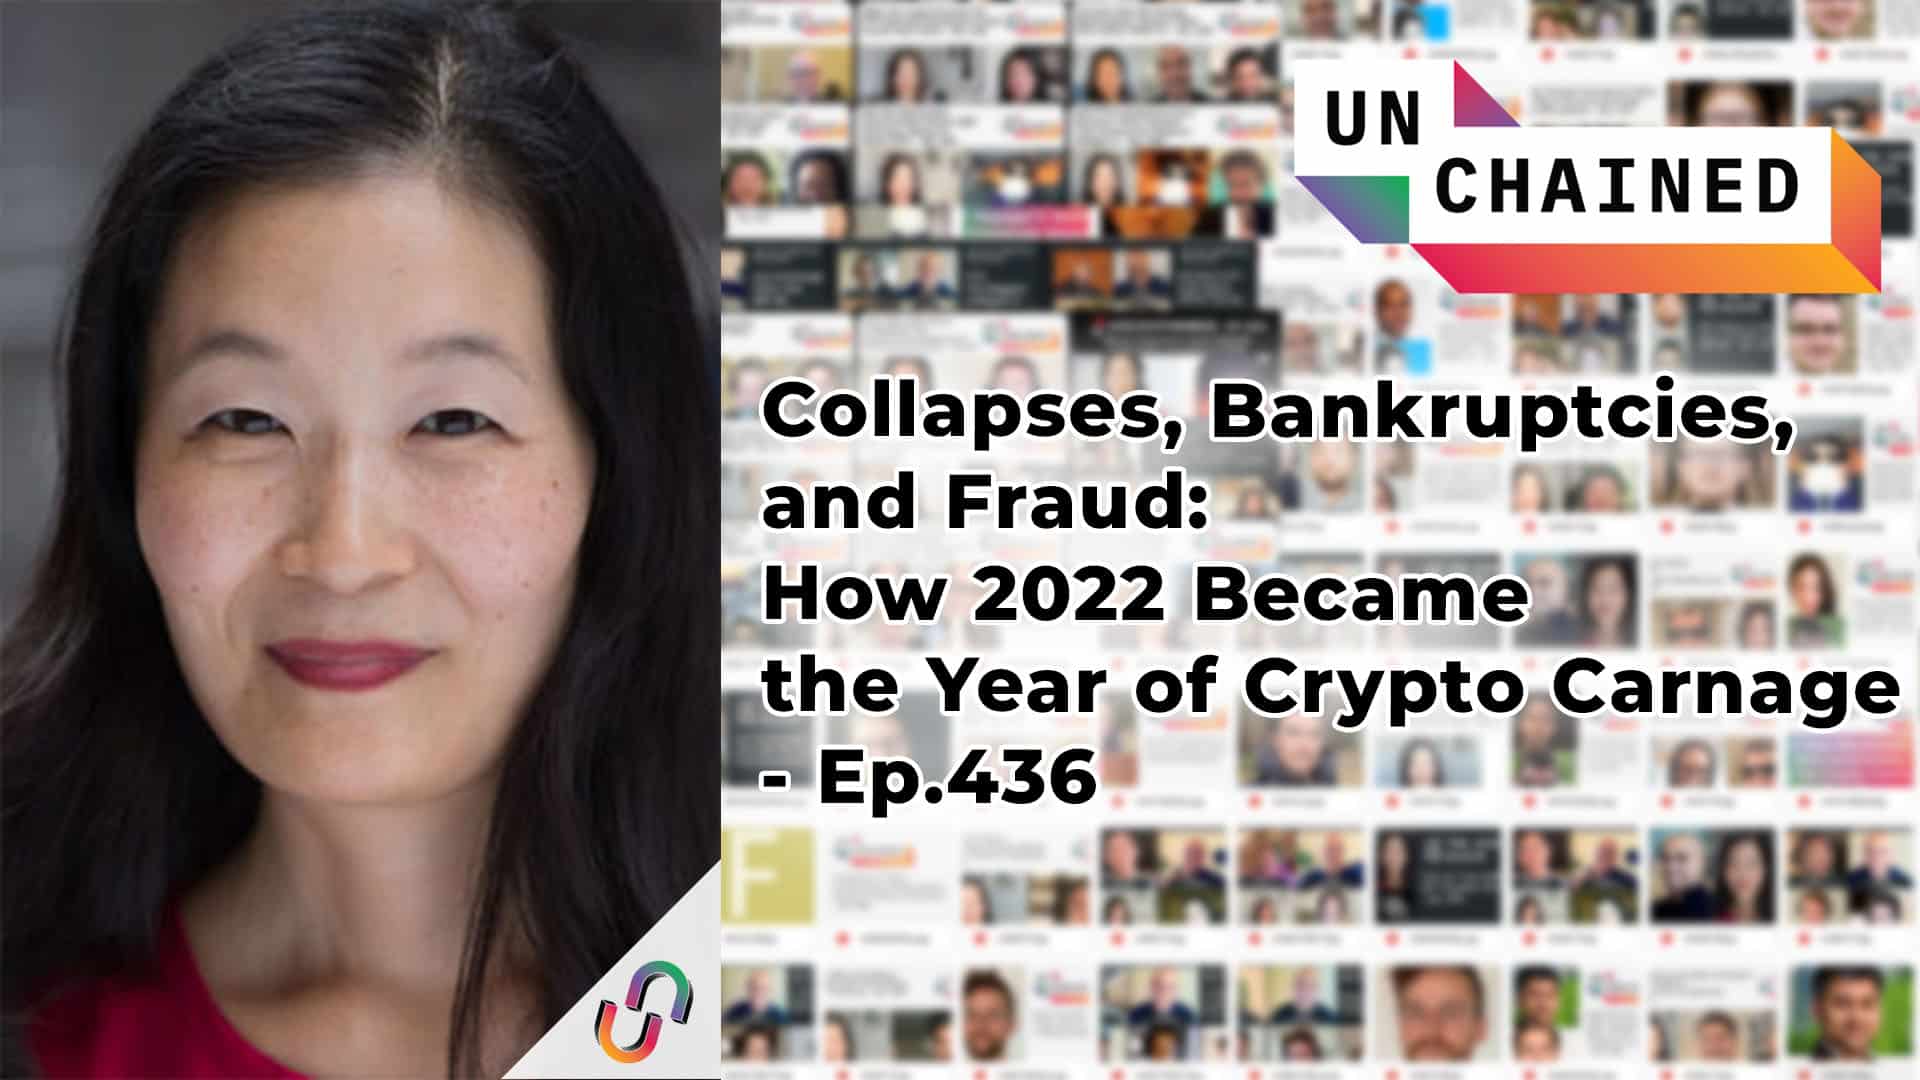 Collapses, Bankruptcies, and Fraud: How 2022 Became the Year of Crypto Carnage - Ep.436